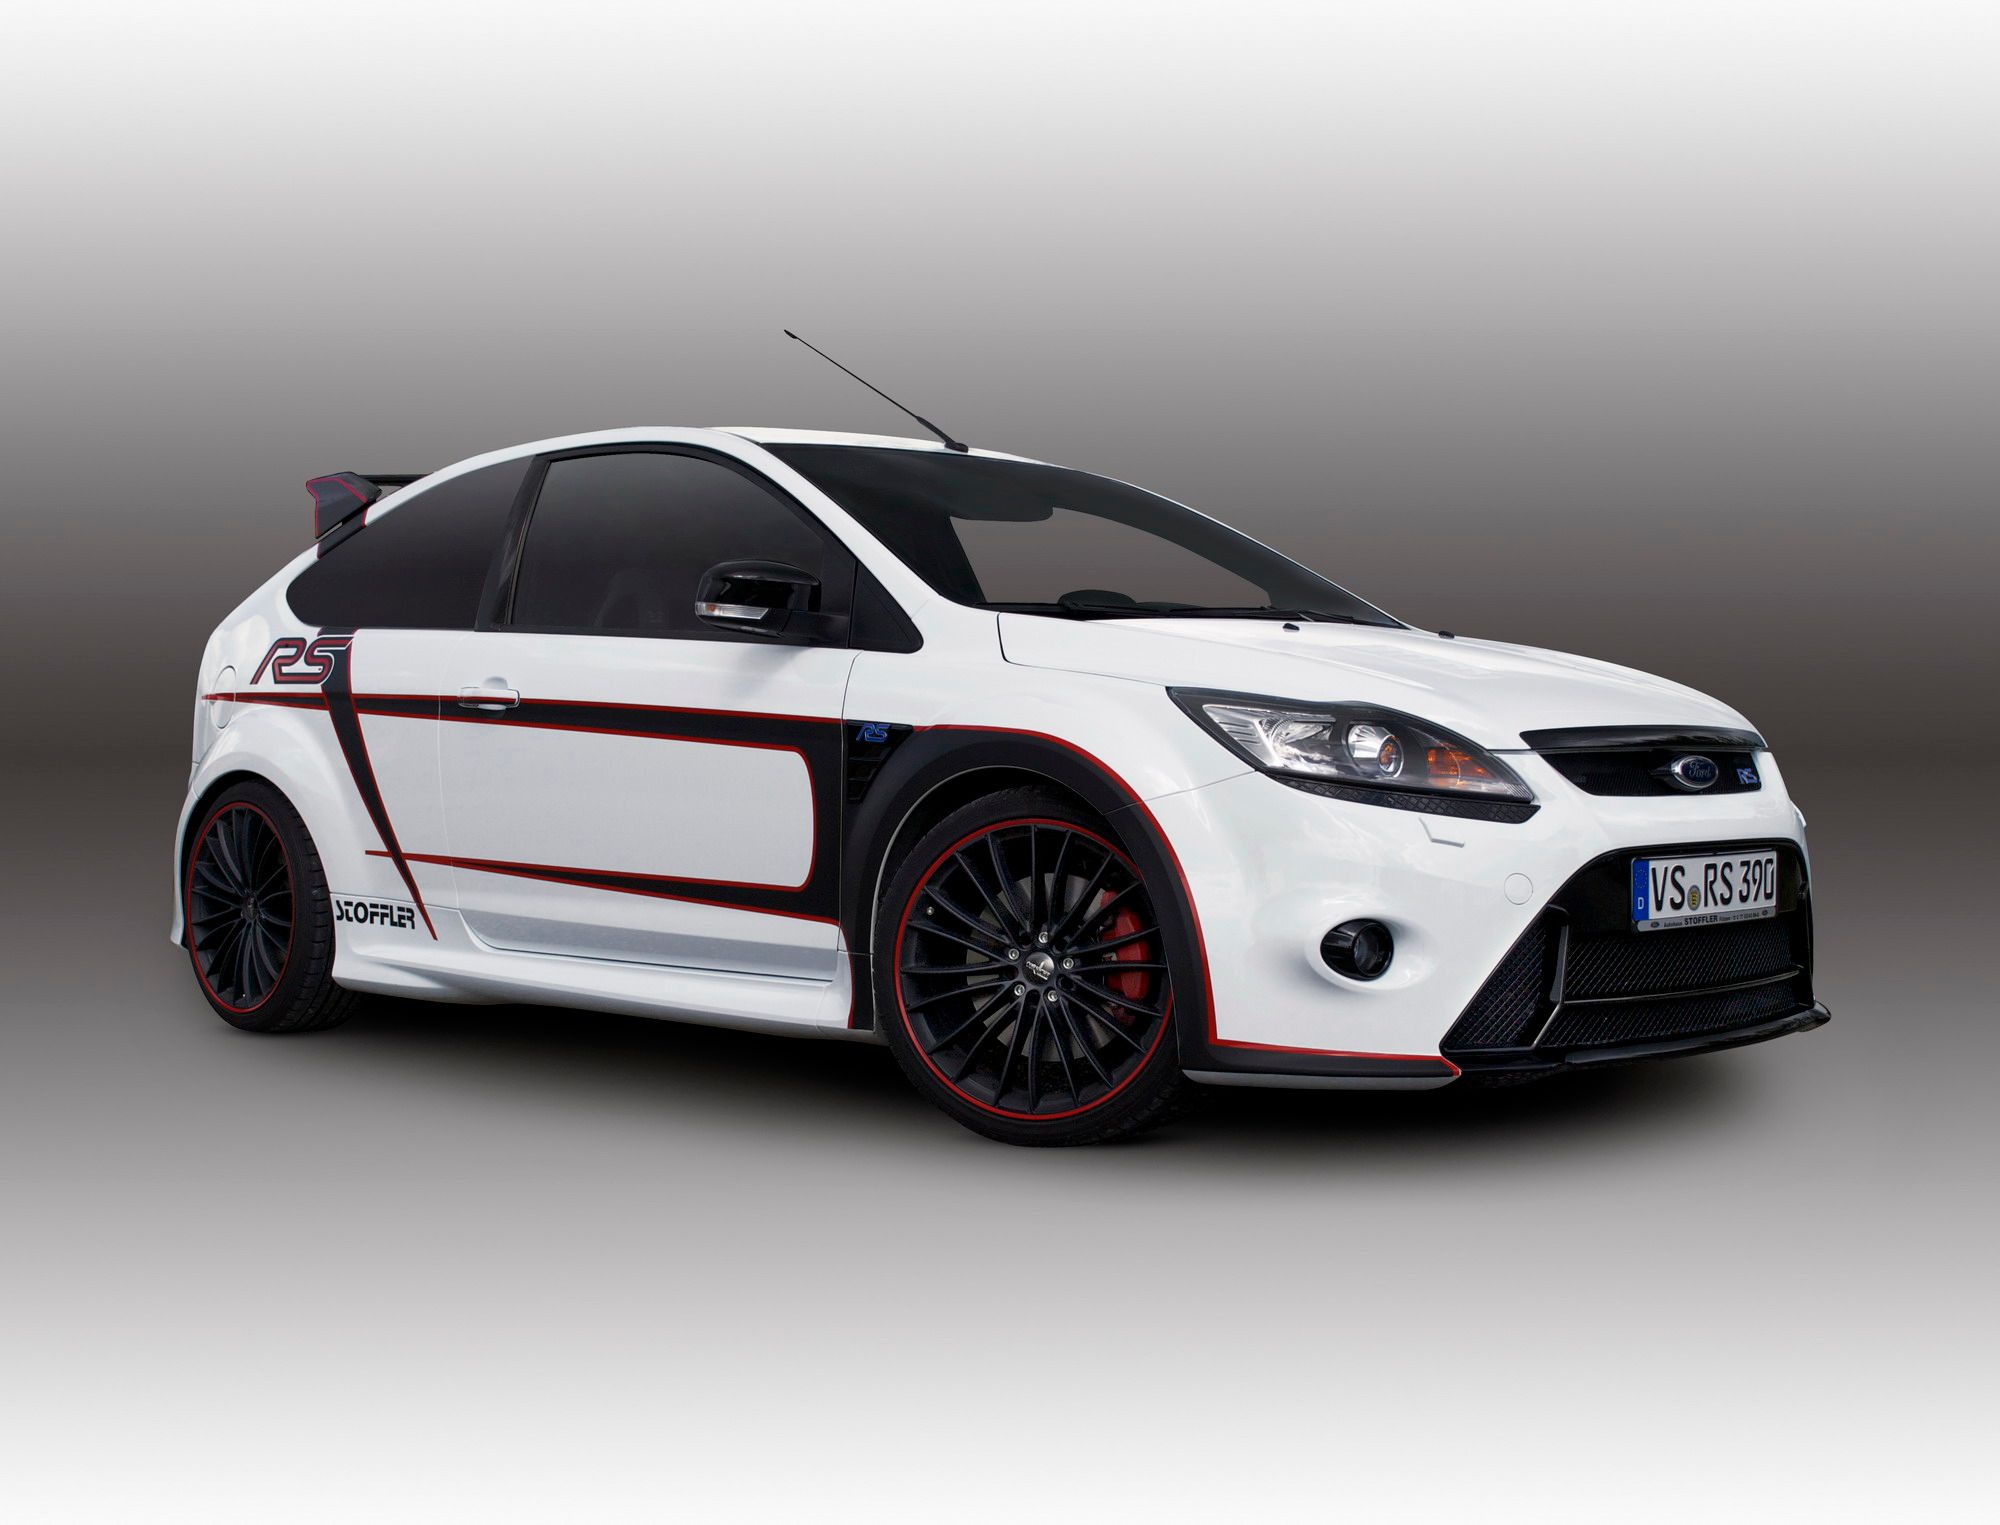 2010 Ford Focus RS by Stoffler